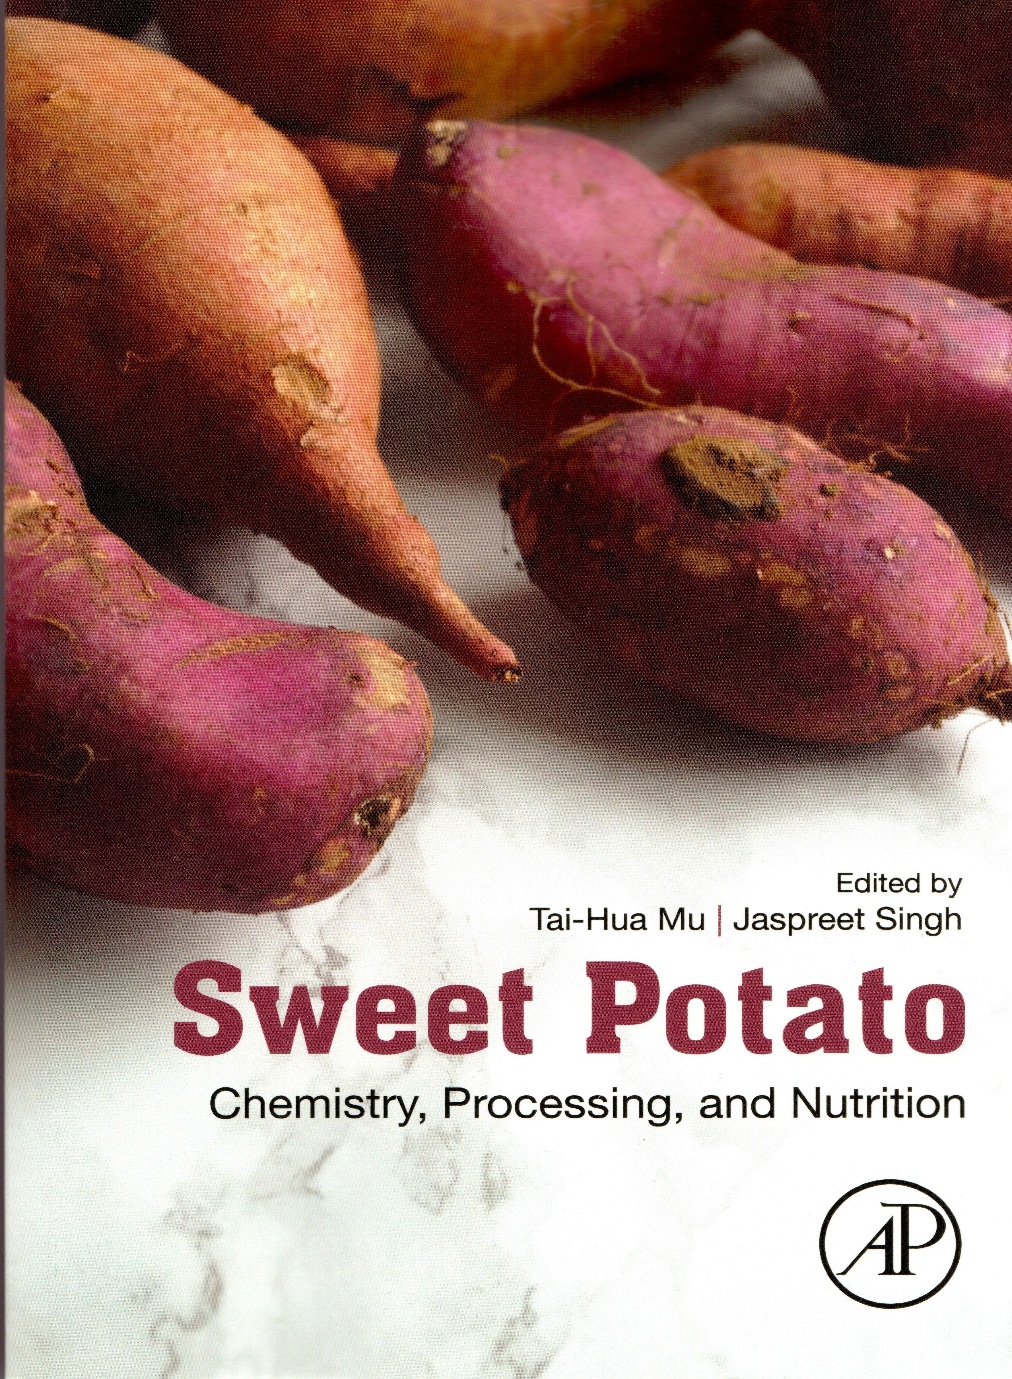 Exploring Ina Garten's Irresistible Sweet Potato Creations: From Classic Comfort to Creative Culinary Innovation